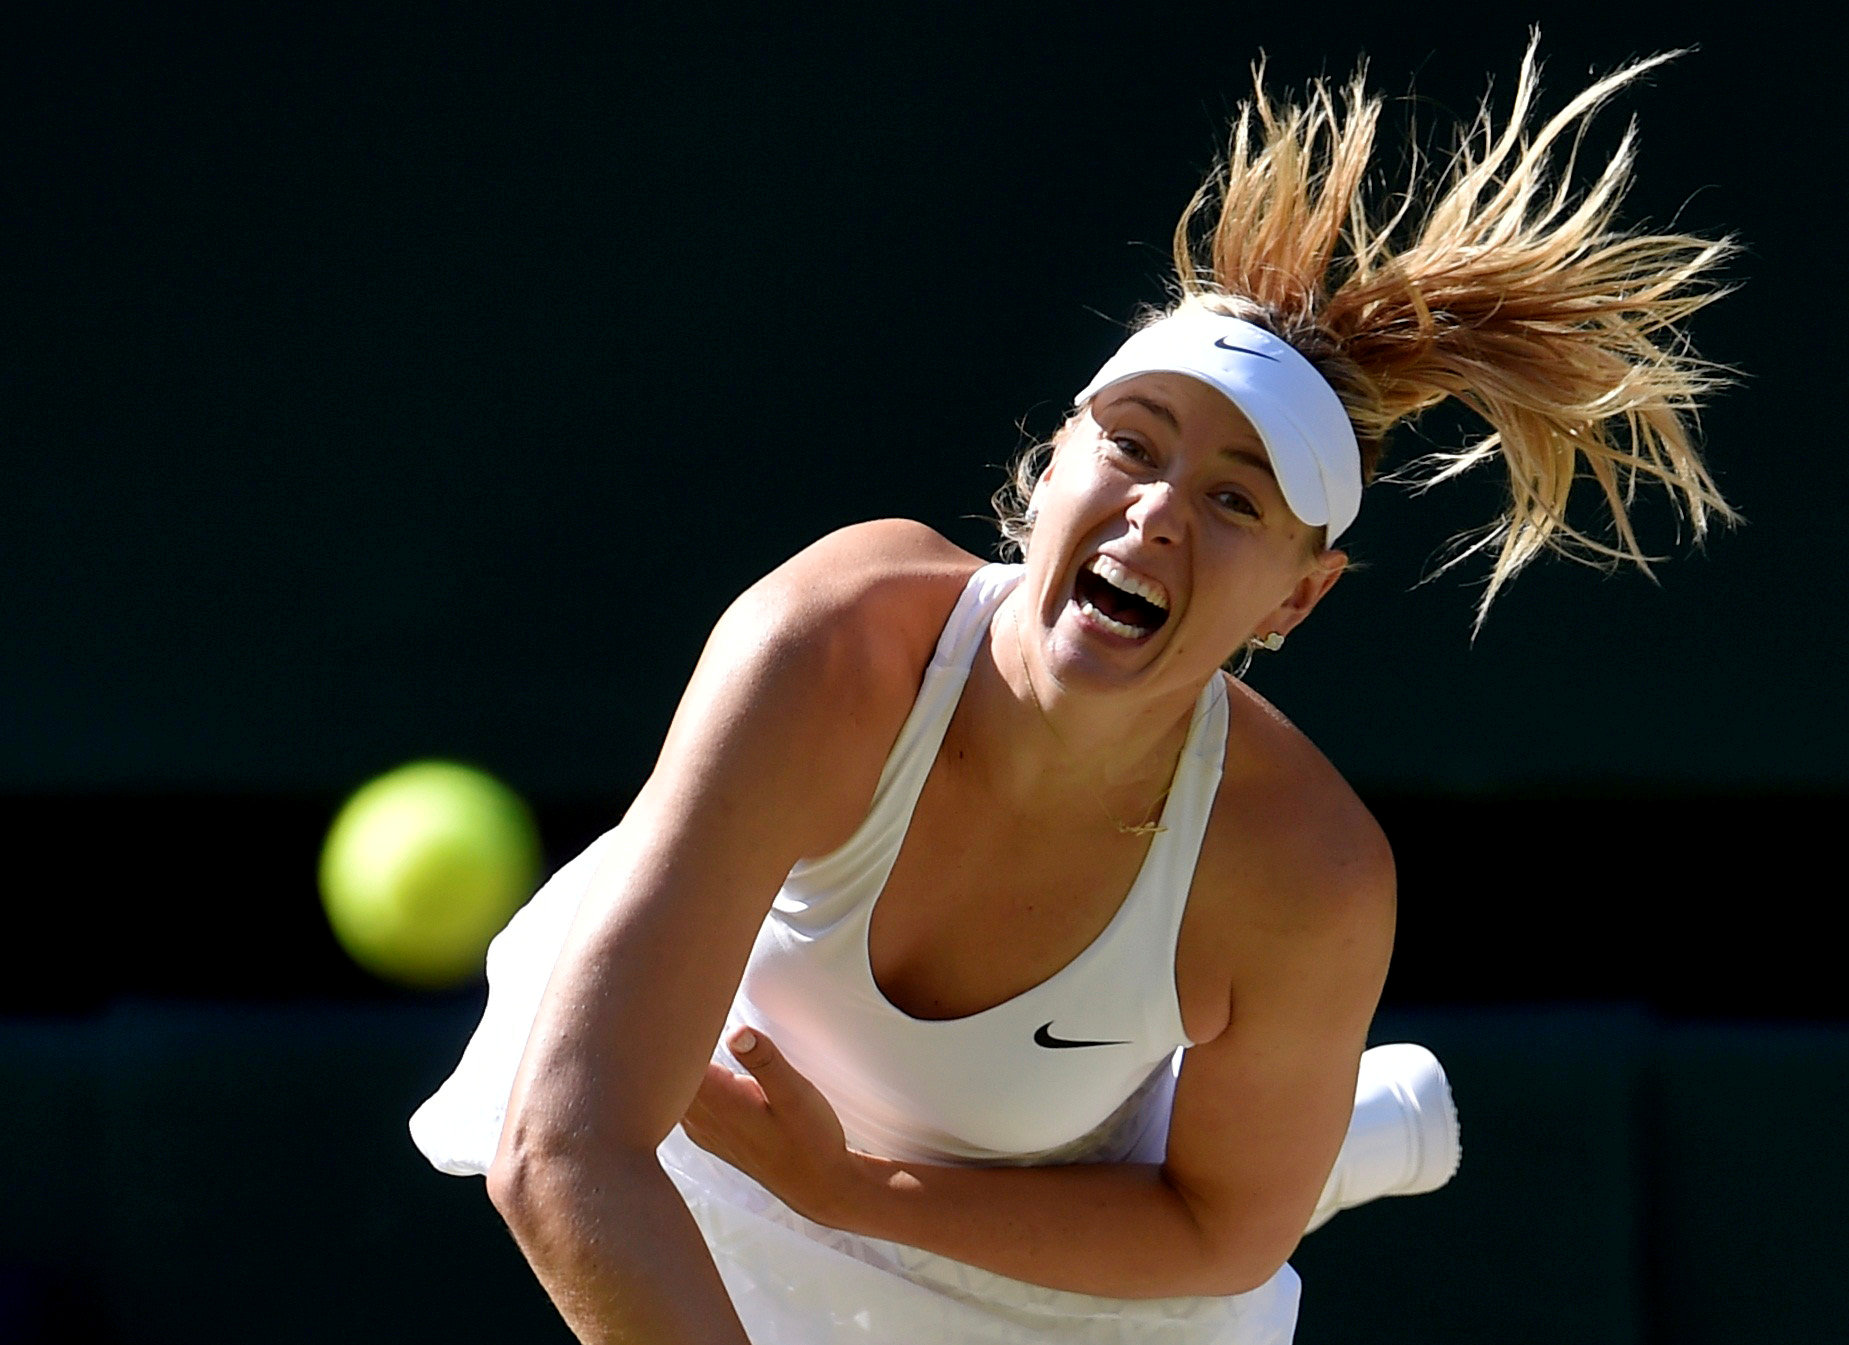 FILE PHOTO: Maria Sharapova of Russia serves during her match against Serena Williams of the U.S.A. at the Wimbledon Tennis Championships in London, July 9, 2015. REUTERS/Toby Melville/File Photo